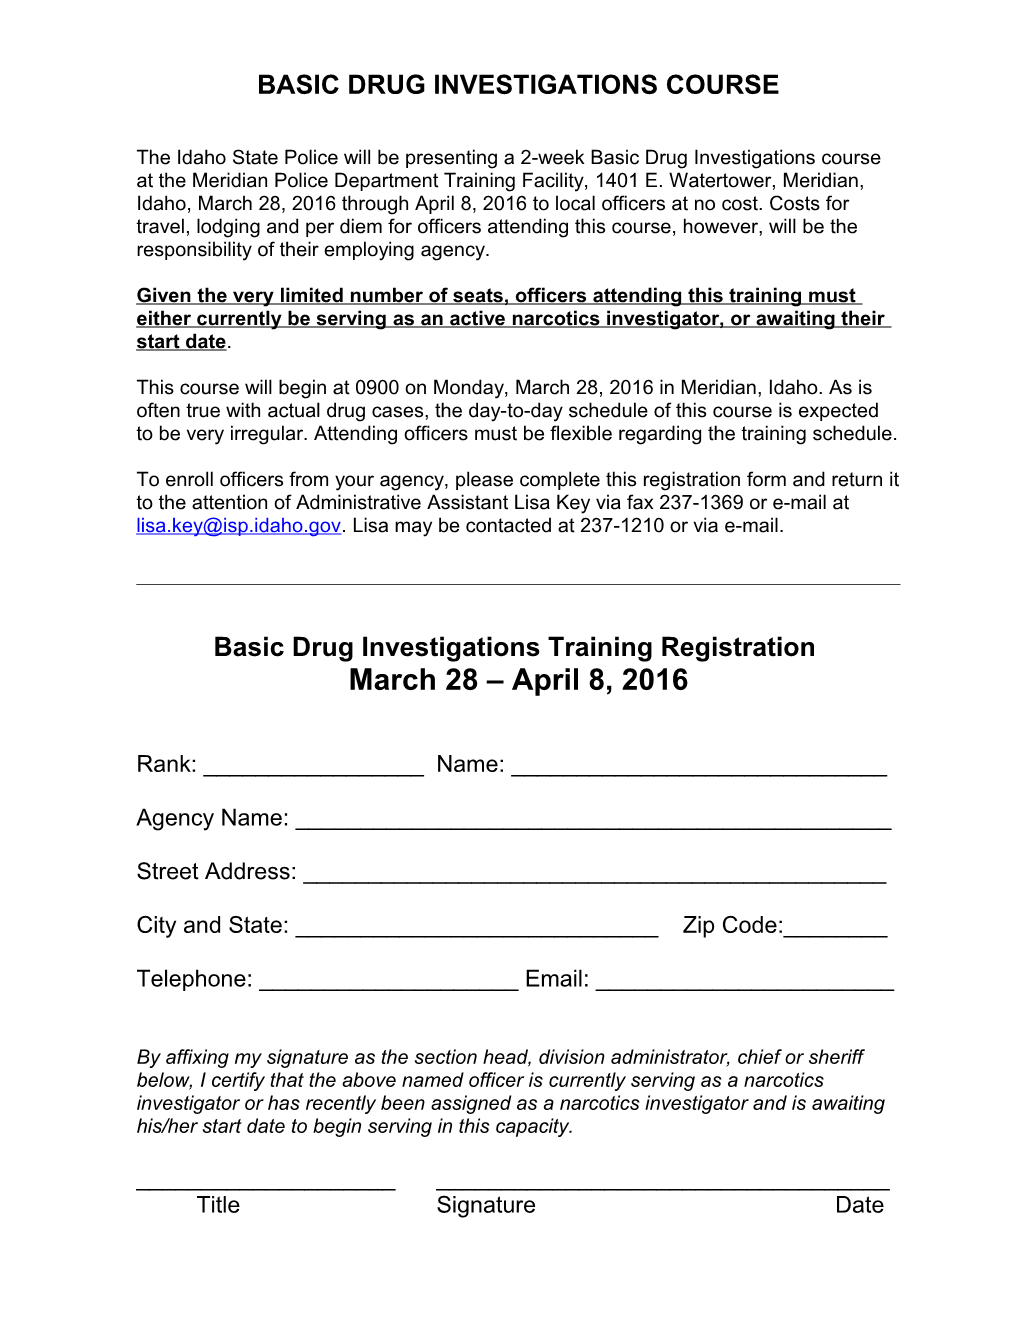 Basic Narcotices Investigations Course